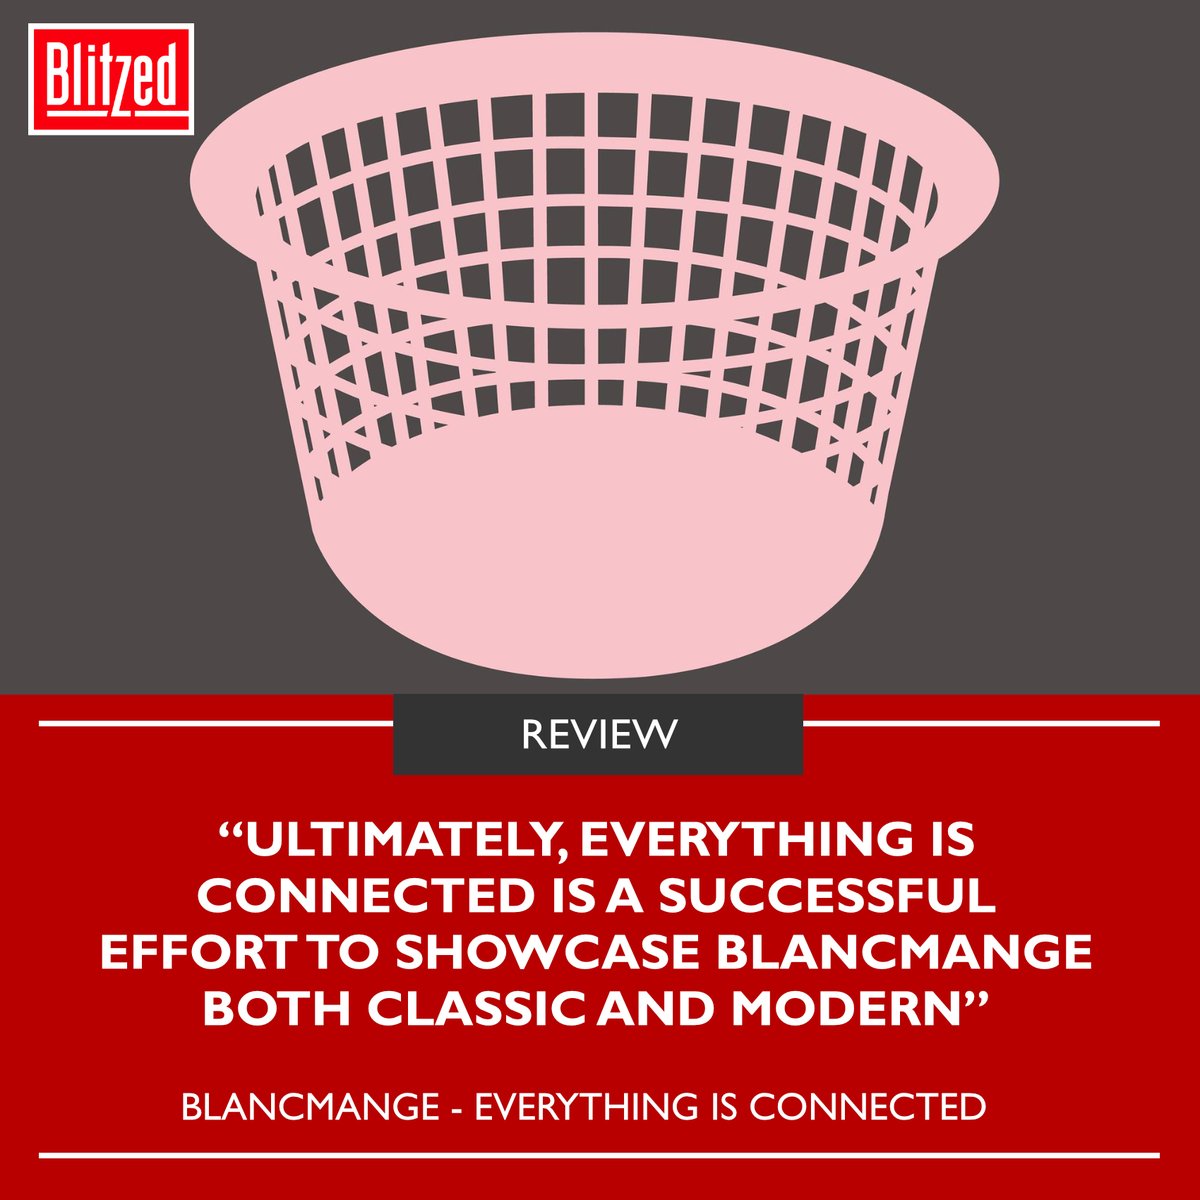 With the forthcoming release of new @_blancmange_ compilation 'Everything Is Connected' due out via @london_records this month, we review the new album in the new Blitzed. Order Blitzed today! 🔥 🎹Order Now: shorturl.at/nIK04 🎹Subscribe: shorturl.at/kFV78